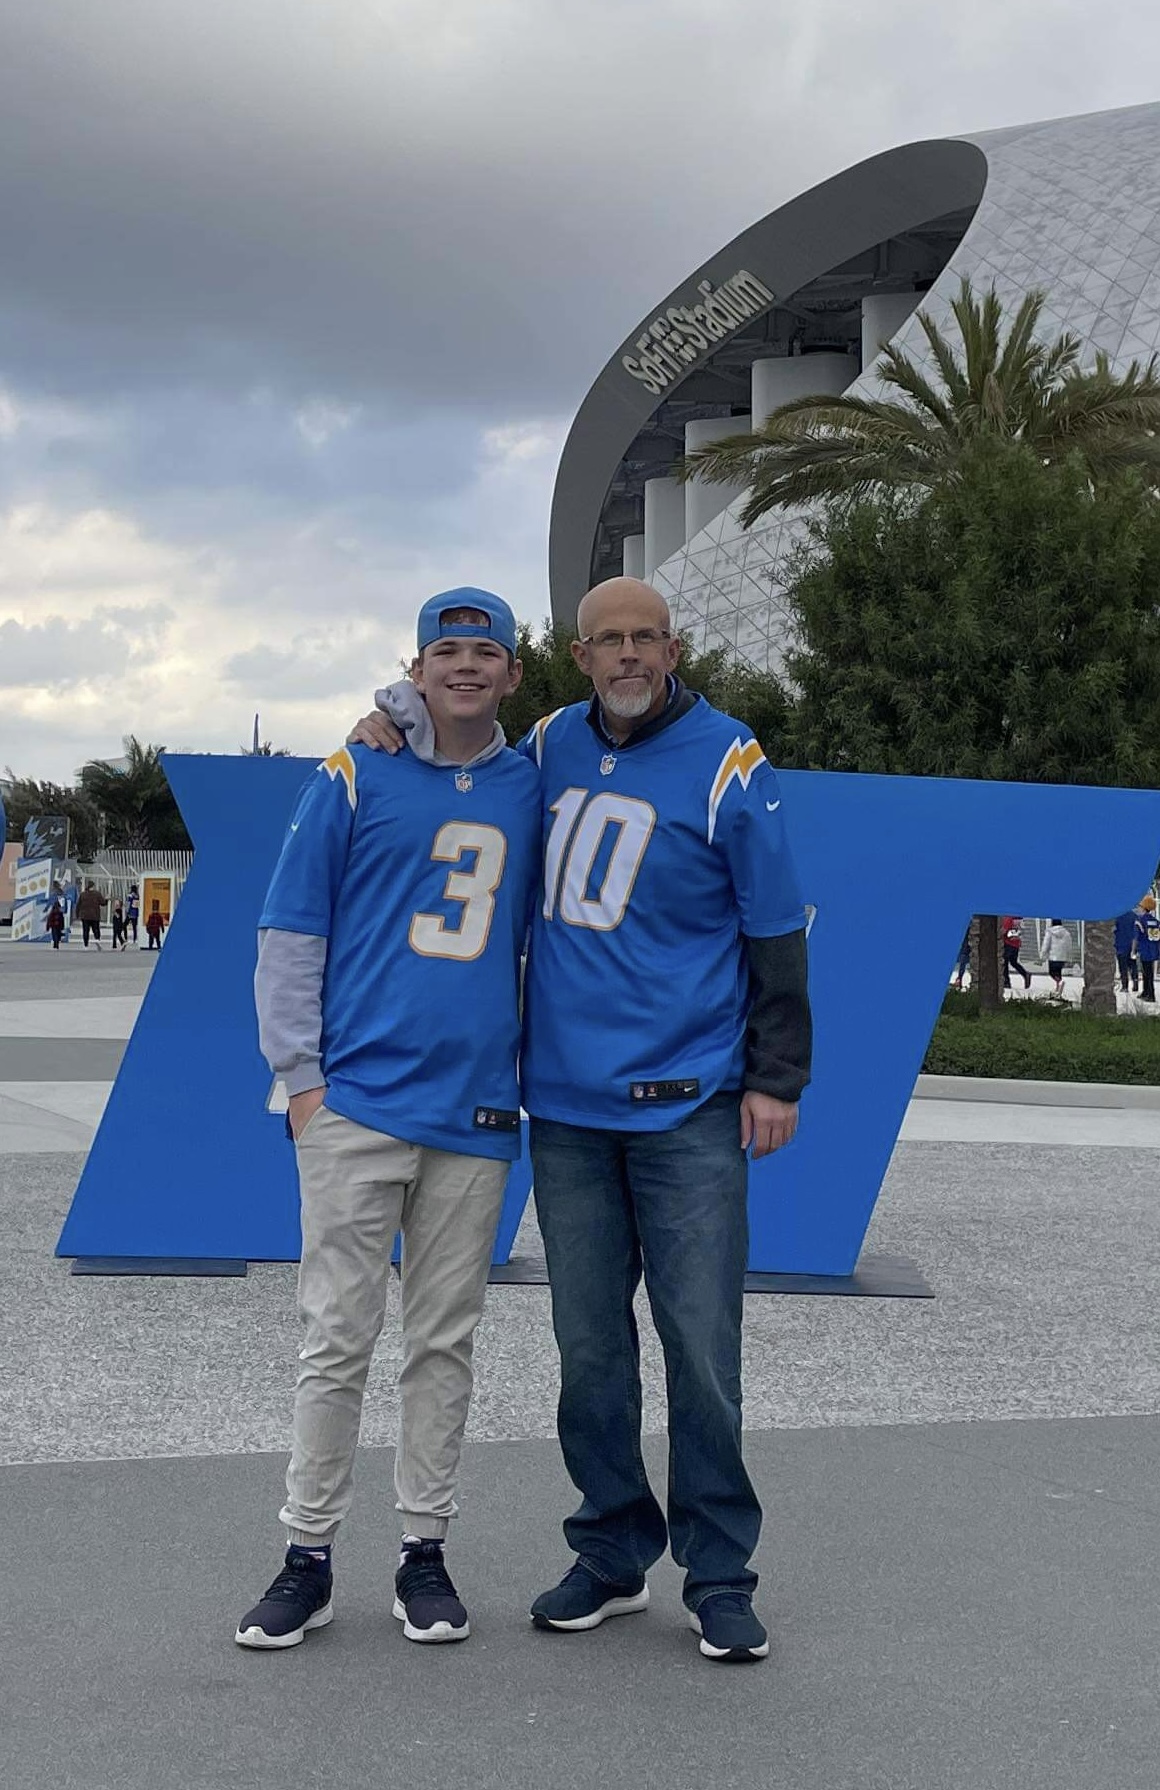 eric and bryson quinney, heart recipient from wyoming, in san diego chargers jerseys standing in front of san diego chargers stadium in california